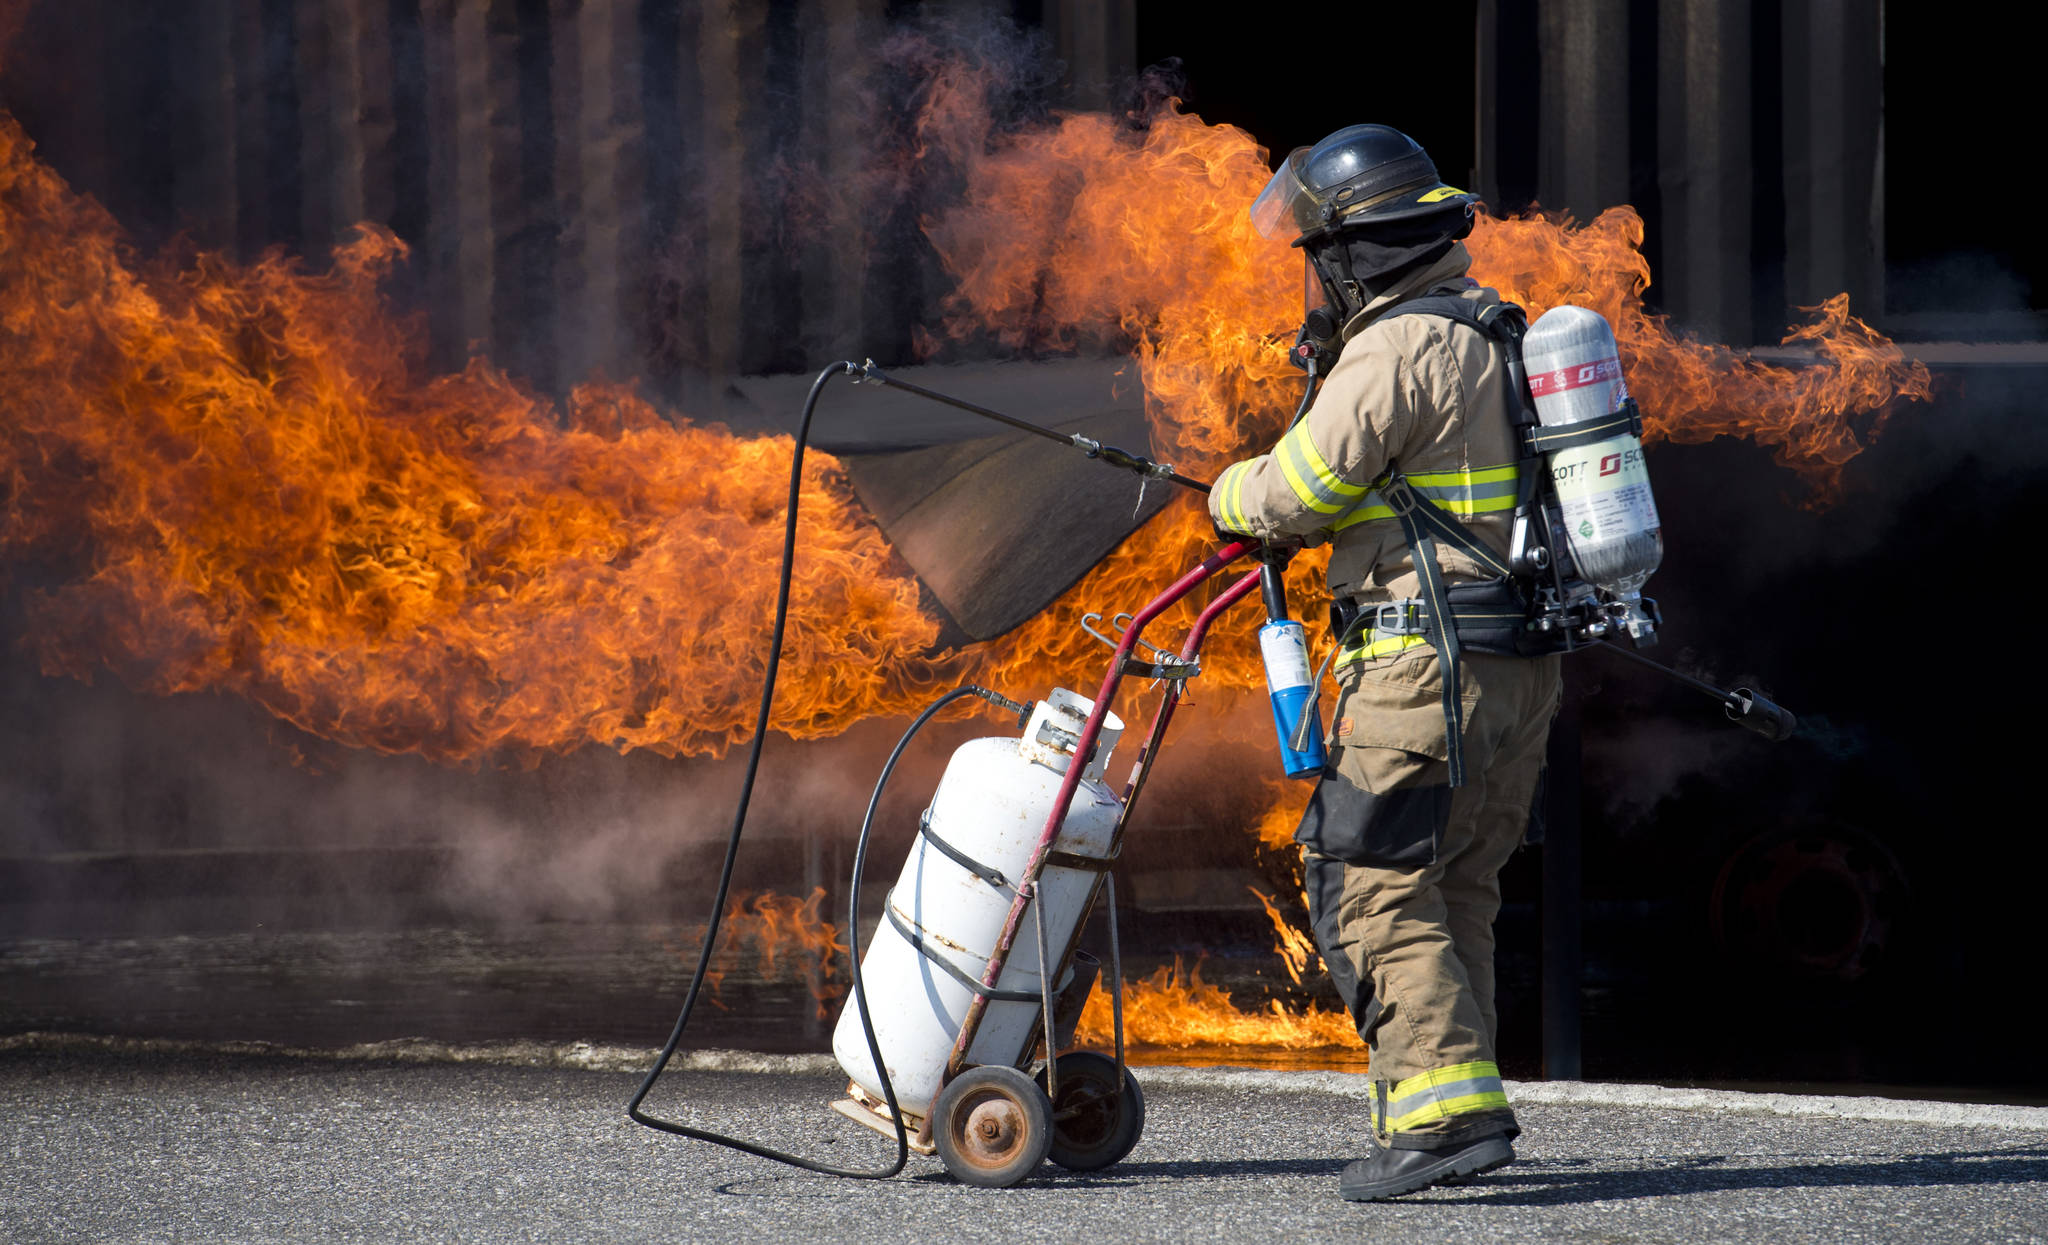 photos by michael penn | juneau empire Krista Telnes lights a training fire as Southeast firefighters update their airport rescue firefighting skills at the Hagevig Regional Fire Training Center on Thursday. See more photos on page A10.